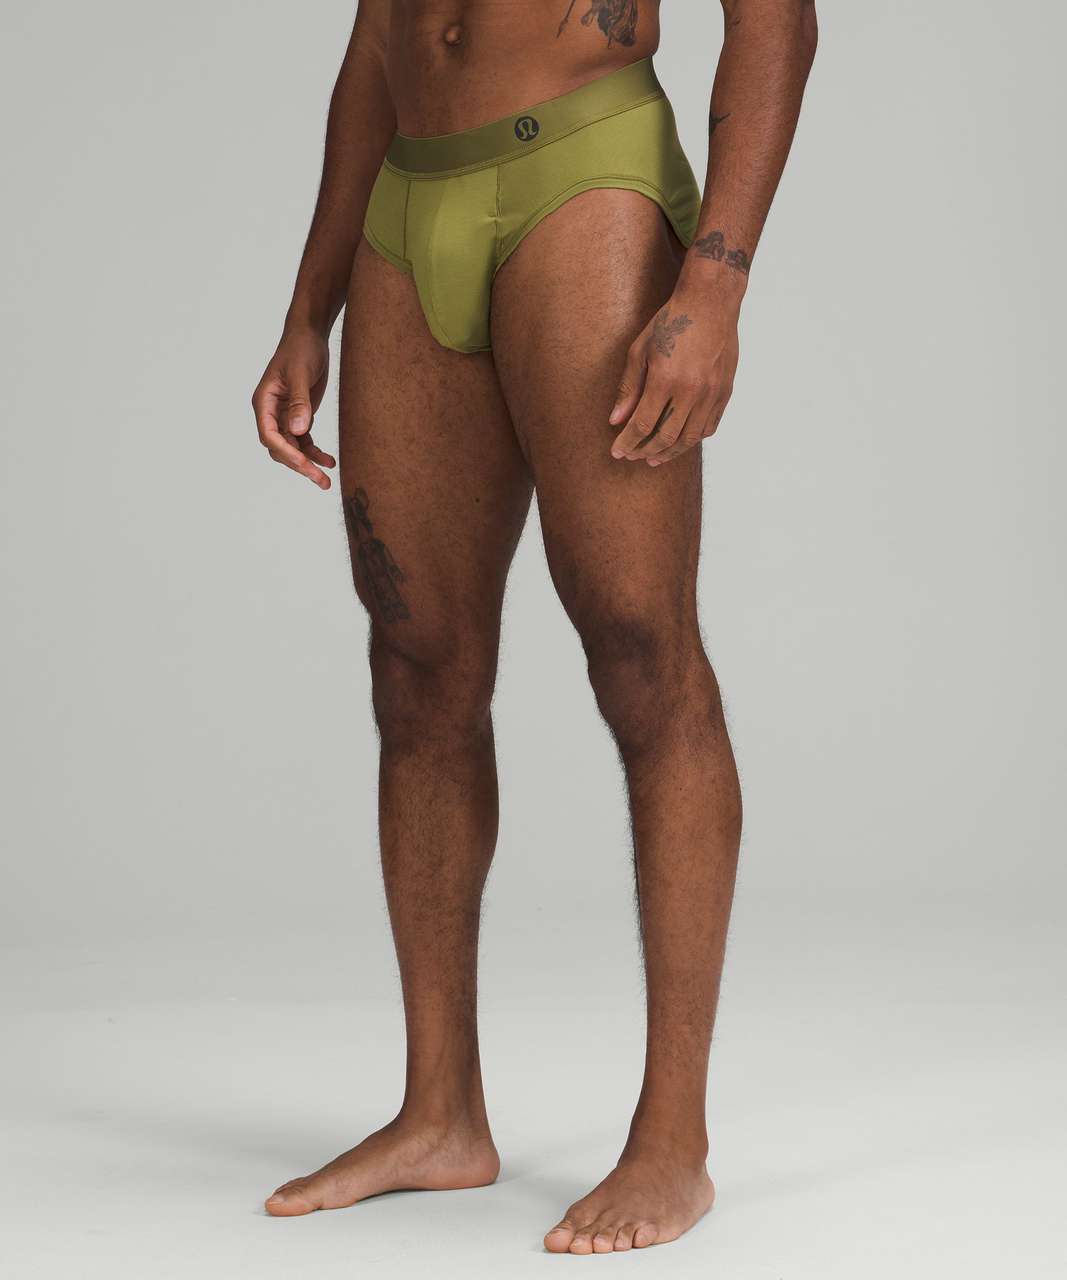 Lululemon Always In Motion Brief with Fly - Bronze Green